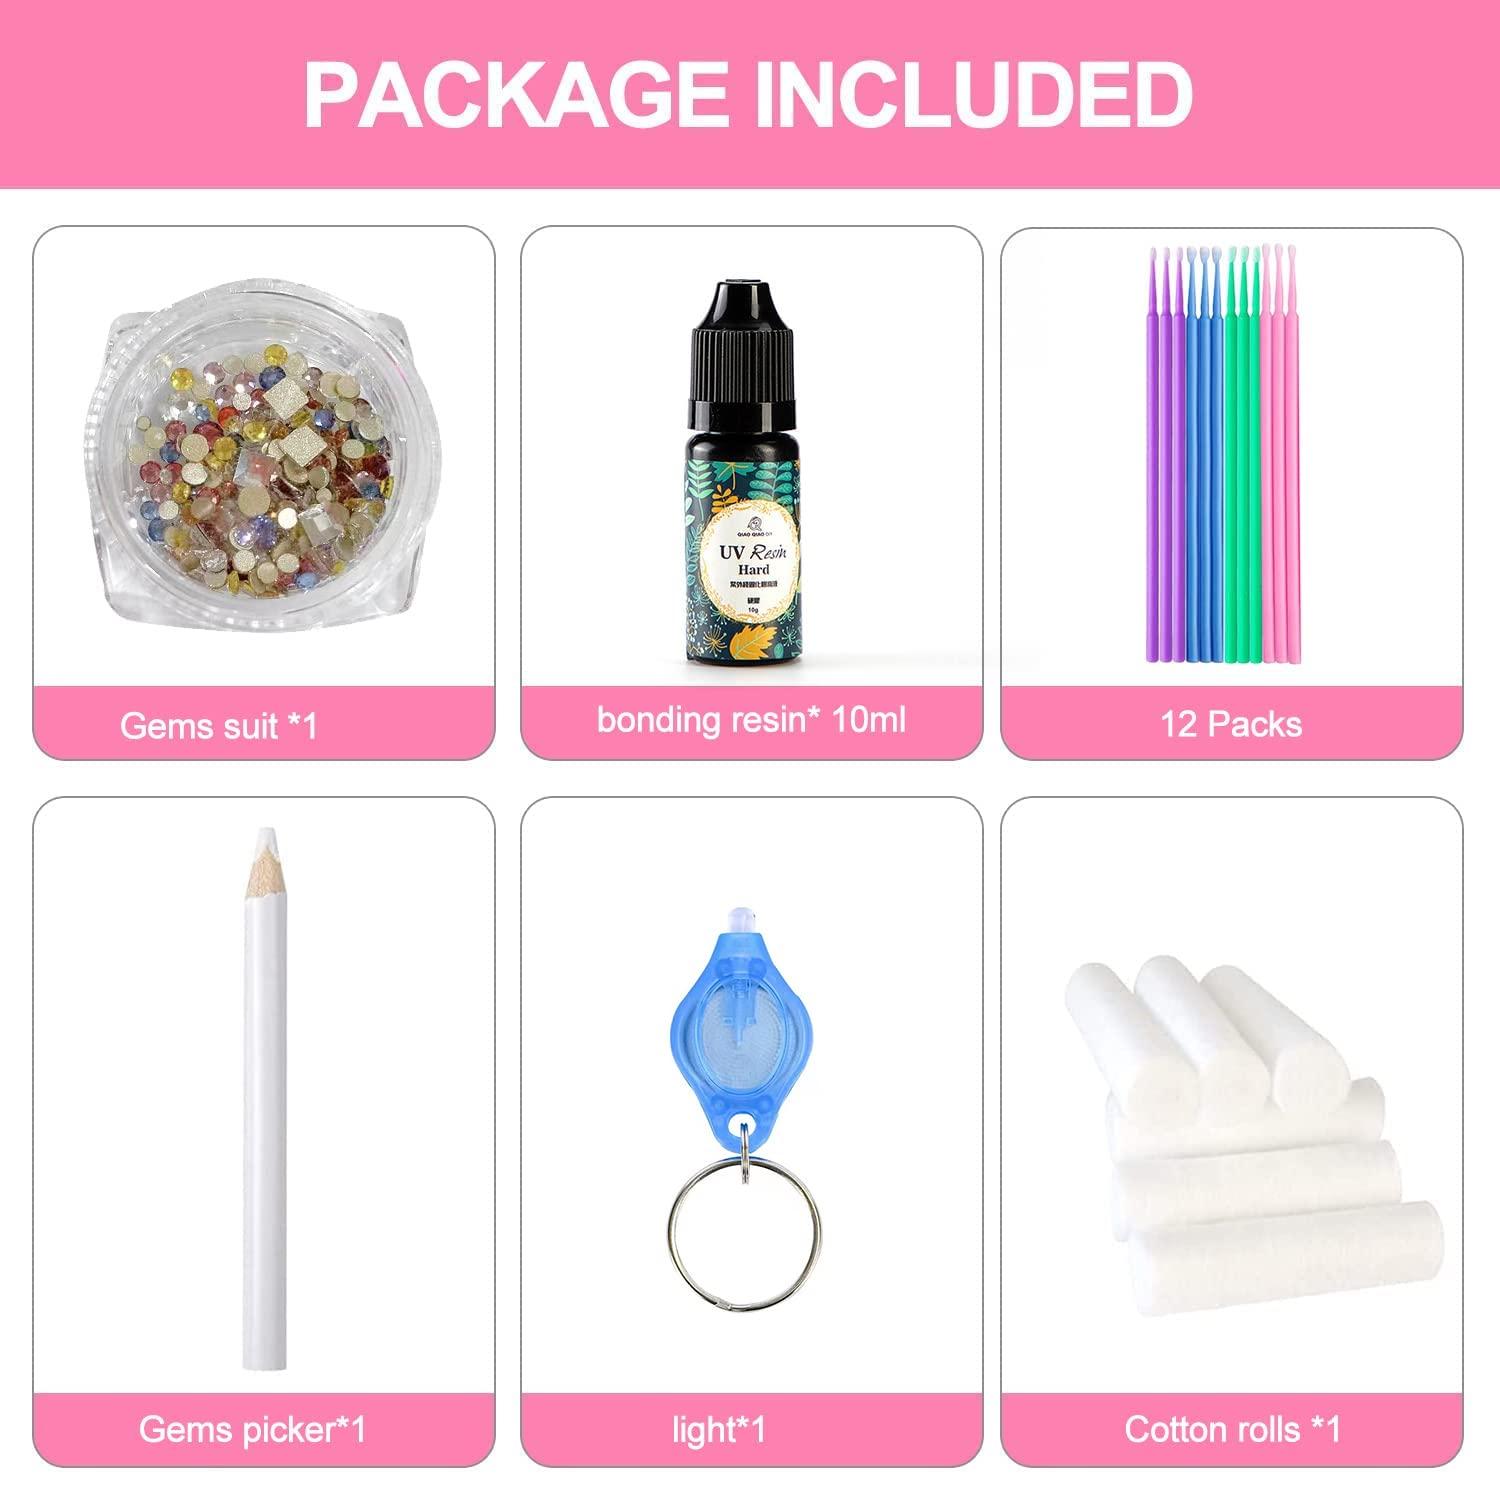 Buy WEITING Tooth Gem Kit with Curing Light and Glue, Crystals Jewelry kit,  Professional DIY Teeth Gems Kit with Multicolor Crystals, Great Tooth  Jewelry Gems Kit Online at desertcartKUWAIT